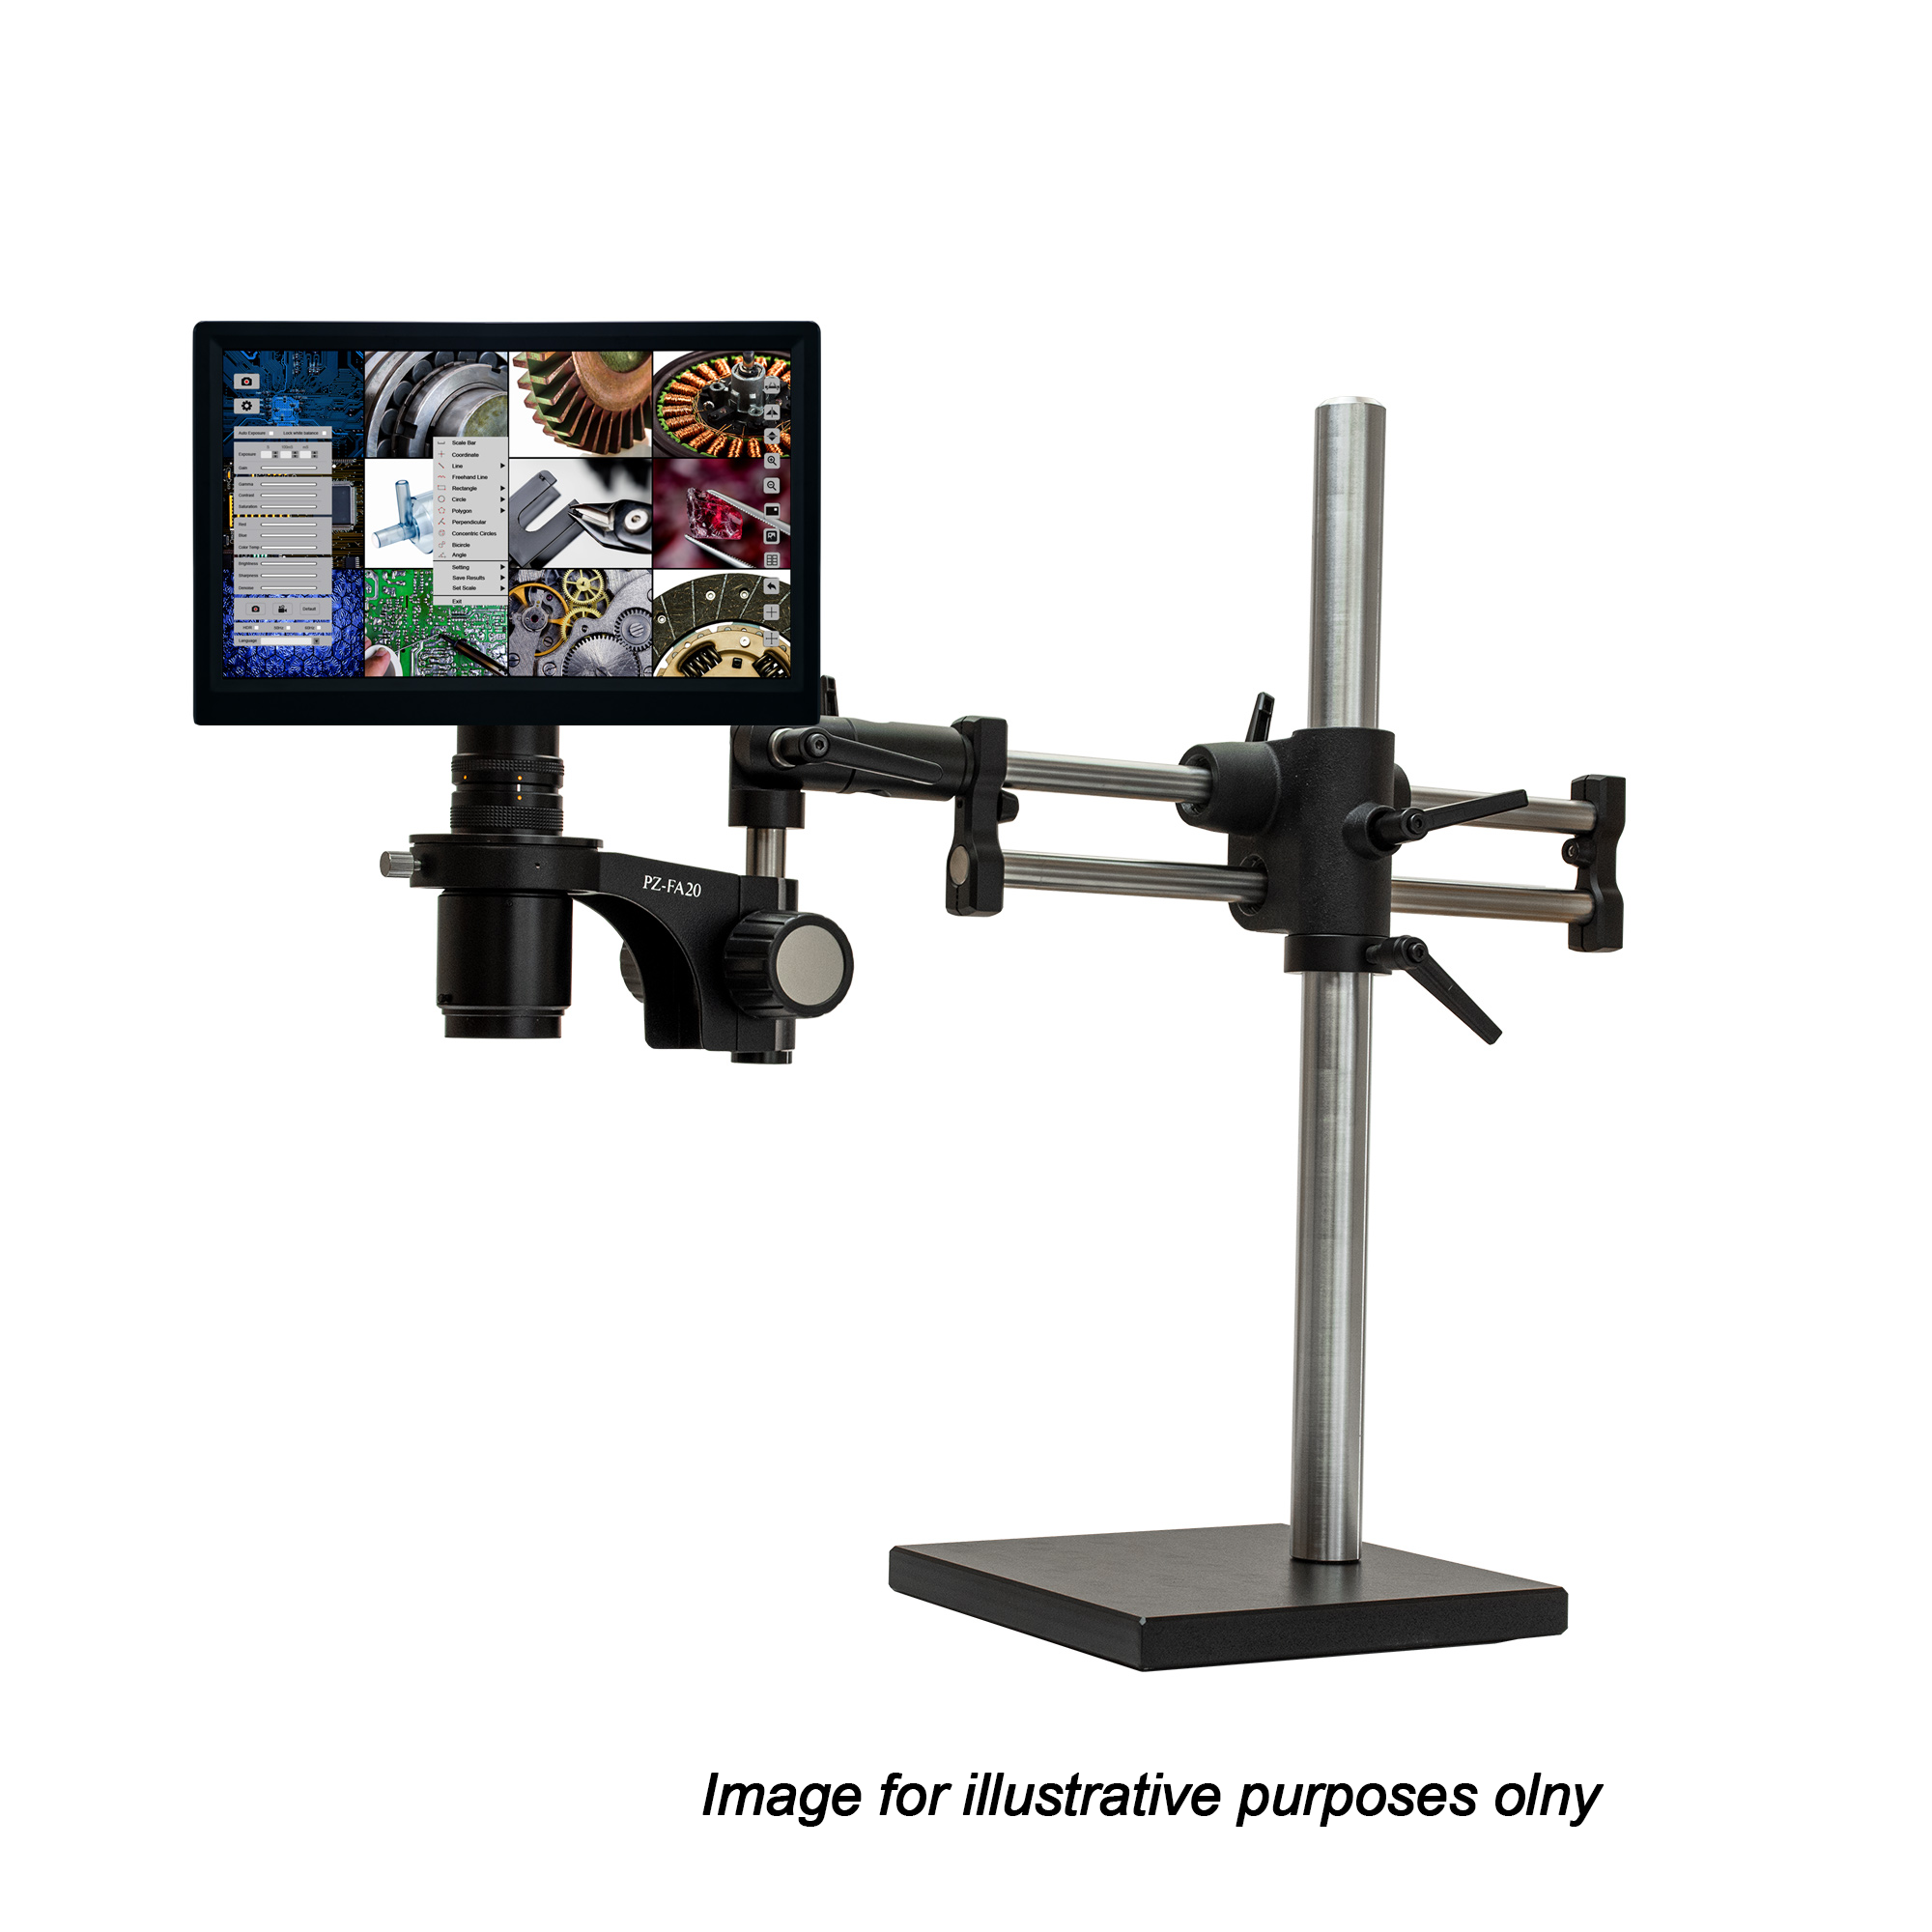 O.C.White Super-Scope HD with 6MP Hybrid HDMI/USB Camera and Ultima EPS Articulating Arm FL1000 with High Output Fluorescent Bulb